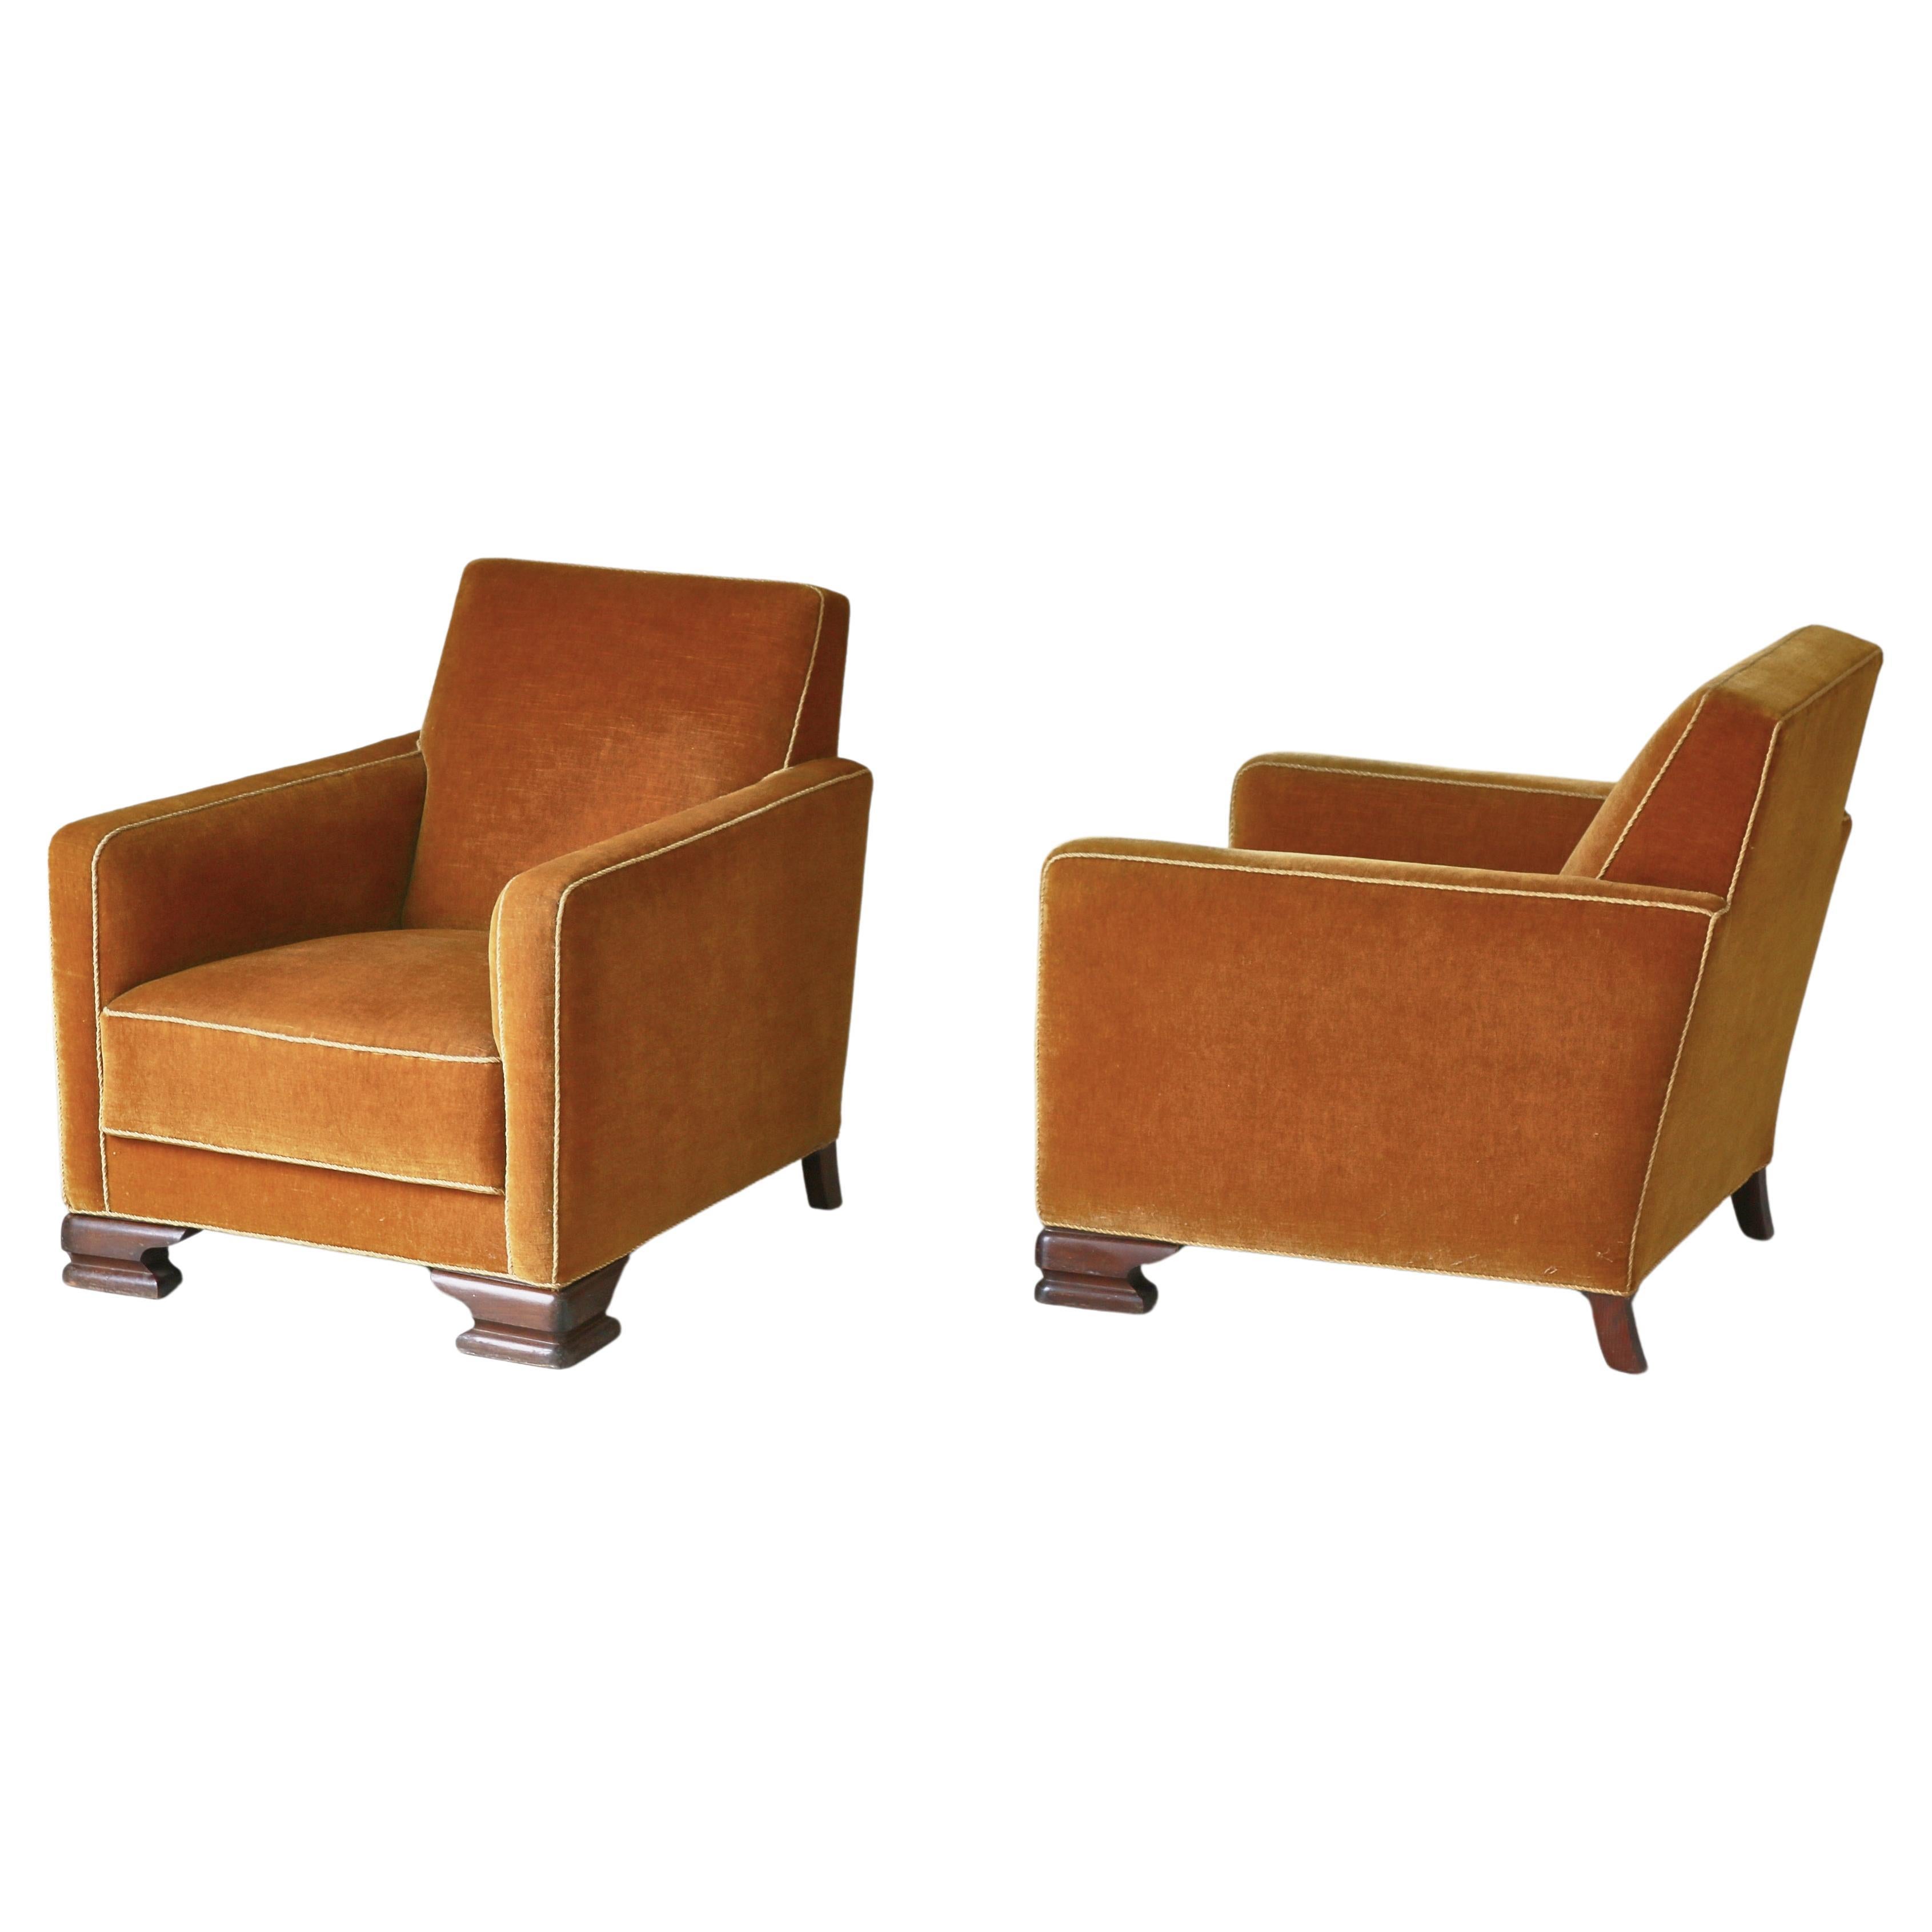 Pair of Danish Cabinetmaker Art Deco Lounge Chairs in Yellow Mohair, 1930s